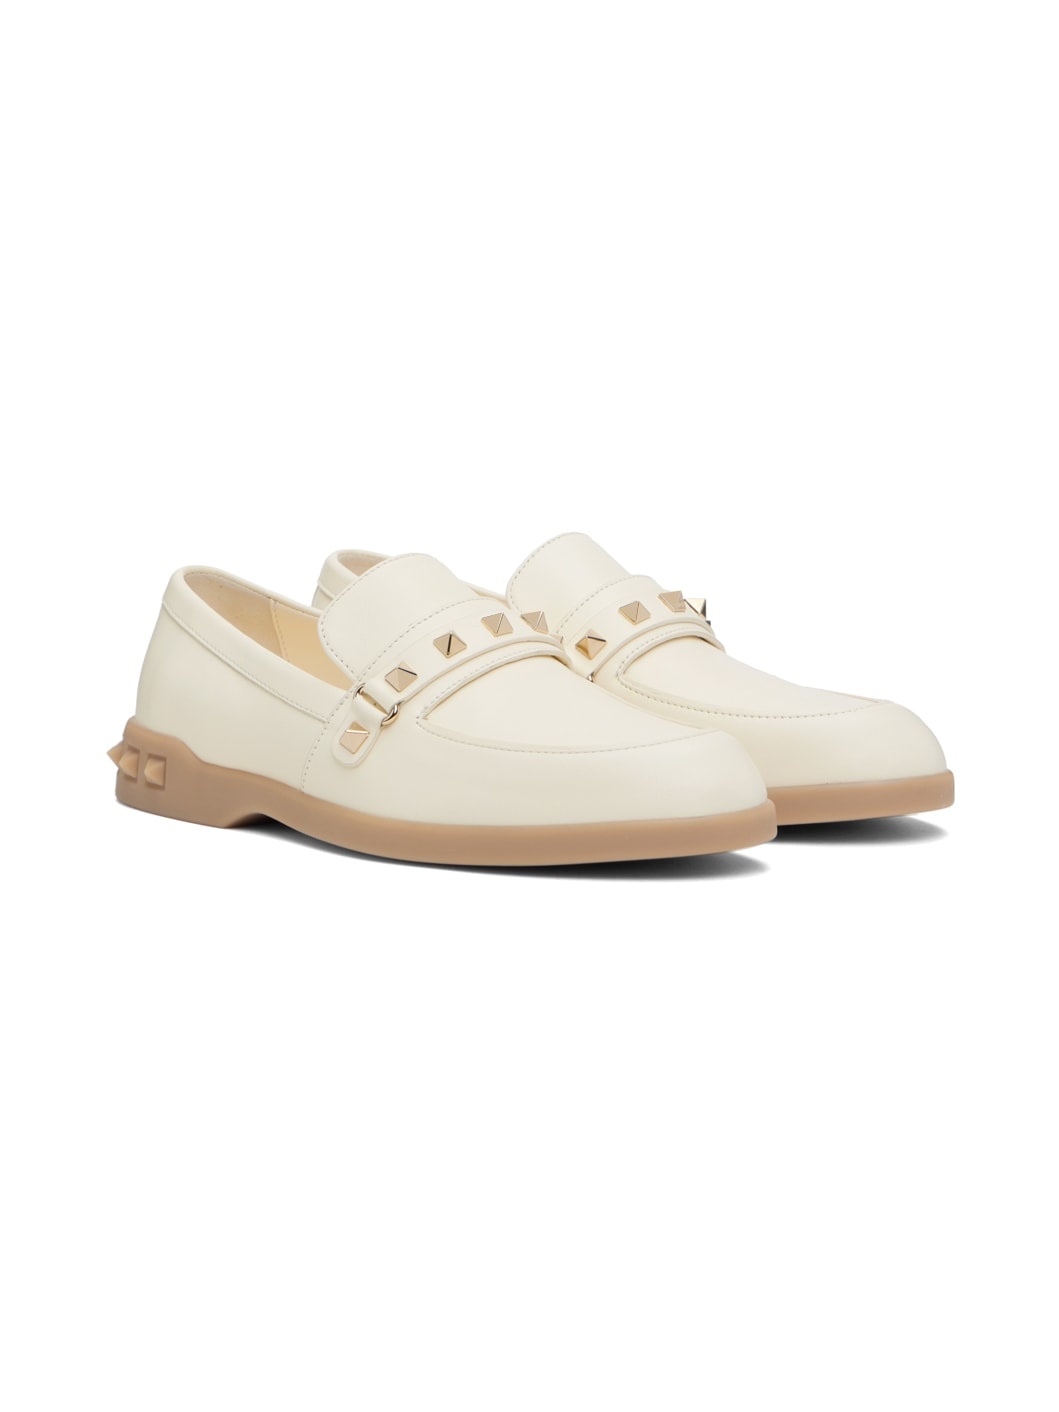 White Leisure Flows Loafers - 4